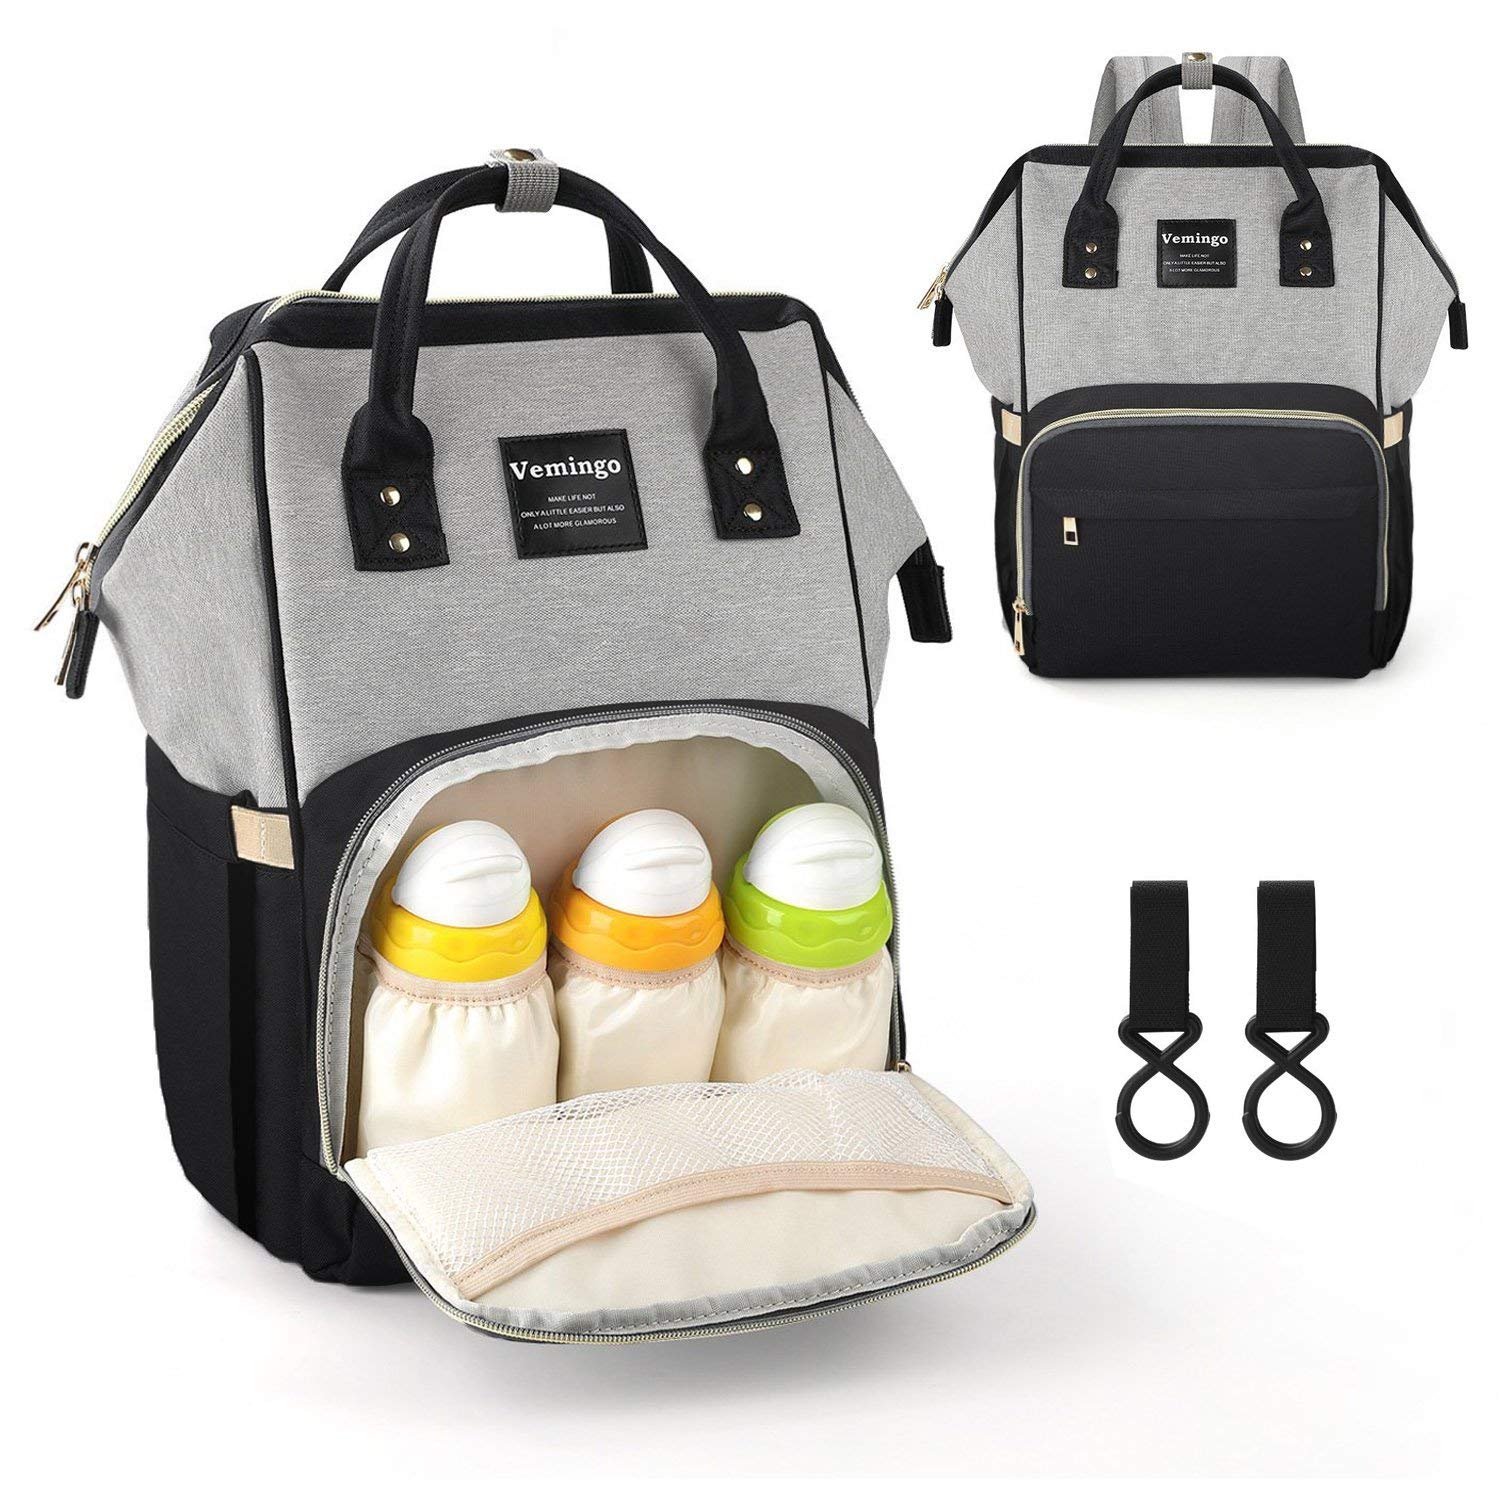 backpack Large black Mommy bag with diaper clutch diaper clutch diaper bag backpack with diaper pouch mom bag diaper backpack set